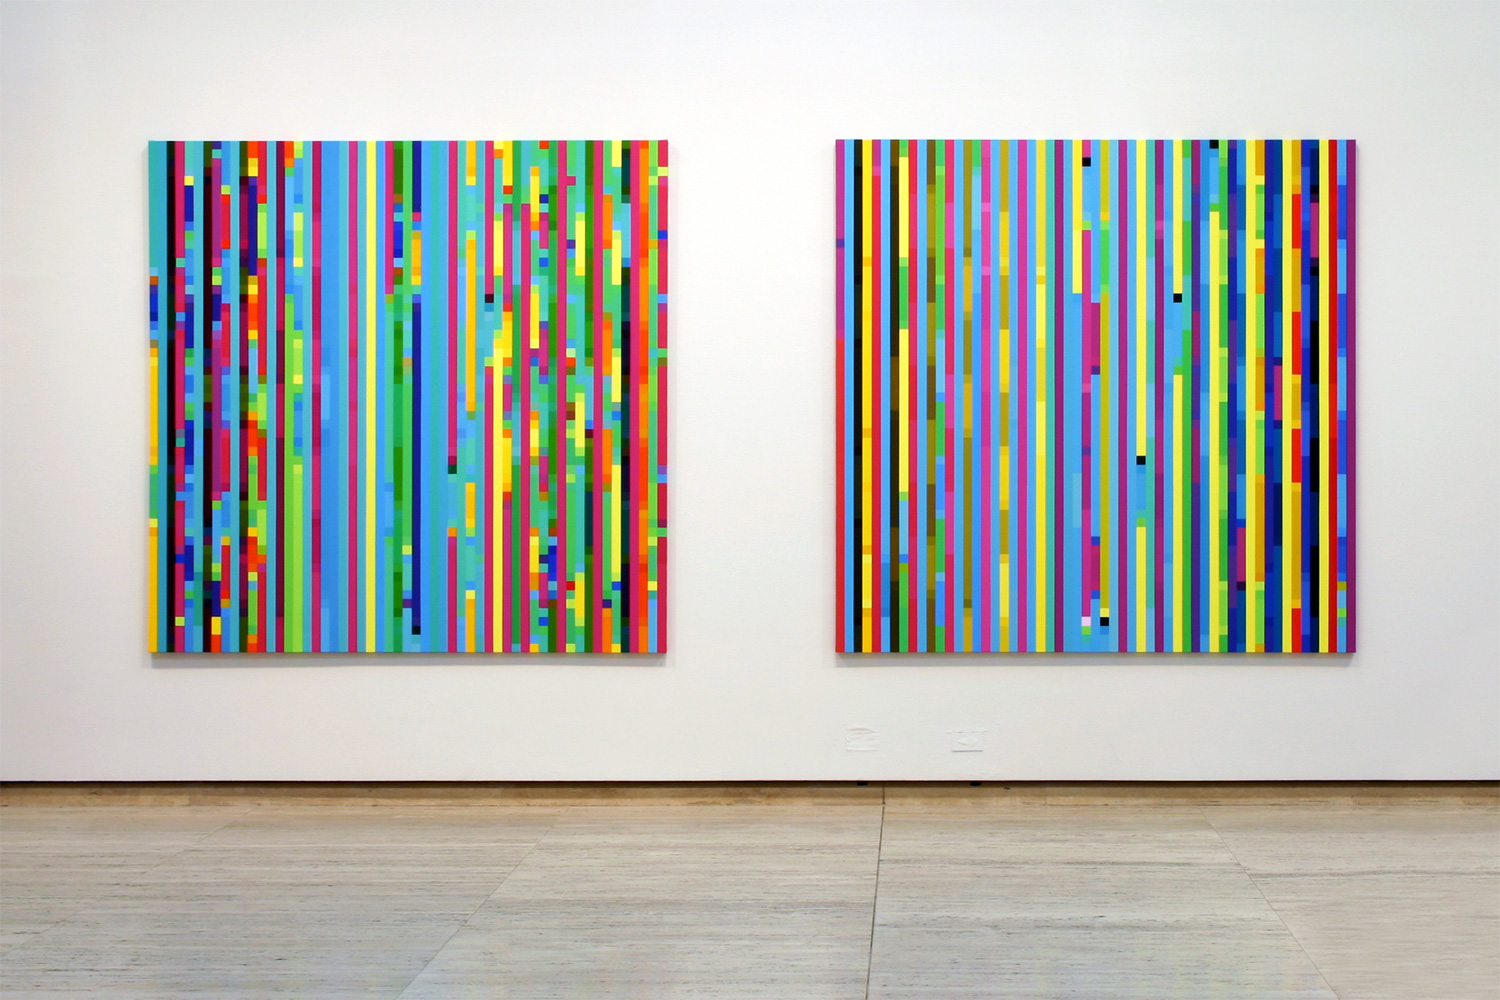   Melatonin Shift #1 Melatonin Shift #2  From the series  Time - Feeling Time , 2003 - 2006 Synthetic polymer paint on linen,&nbsp;198 x 198cm each Photography: Art Gallery of New South Wales 